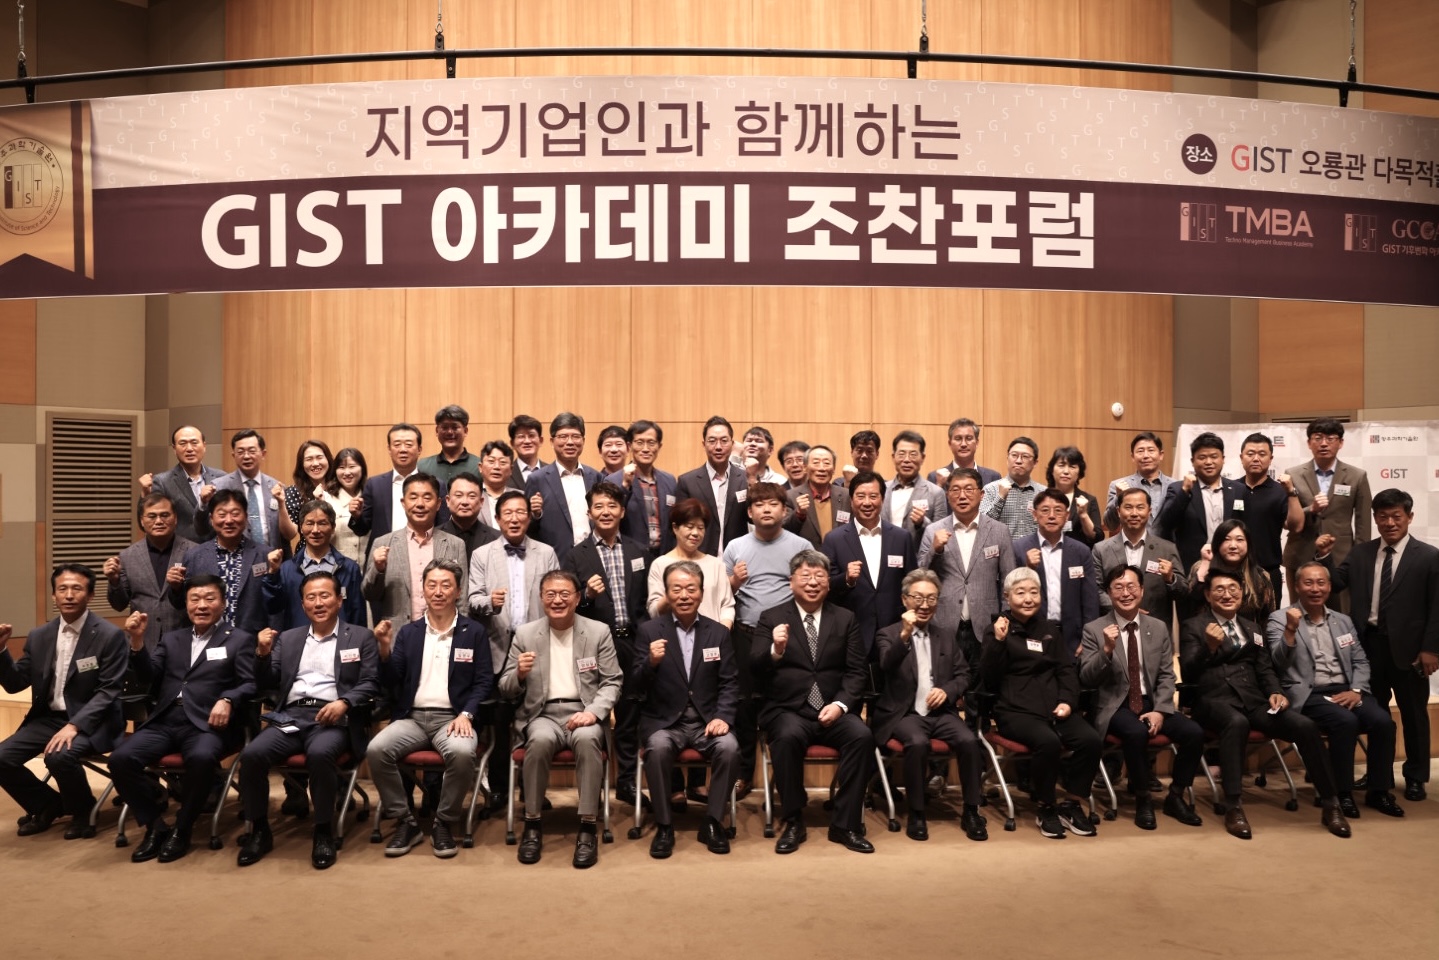 GIST Academy held breakfast forum in May on “Using ChatGPT Smartly” 이미지